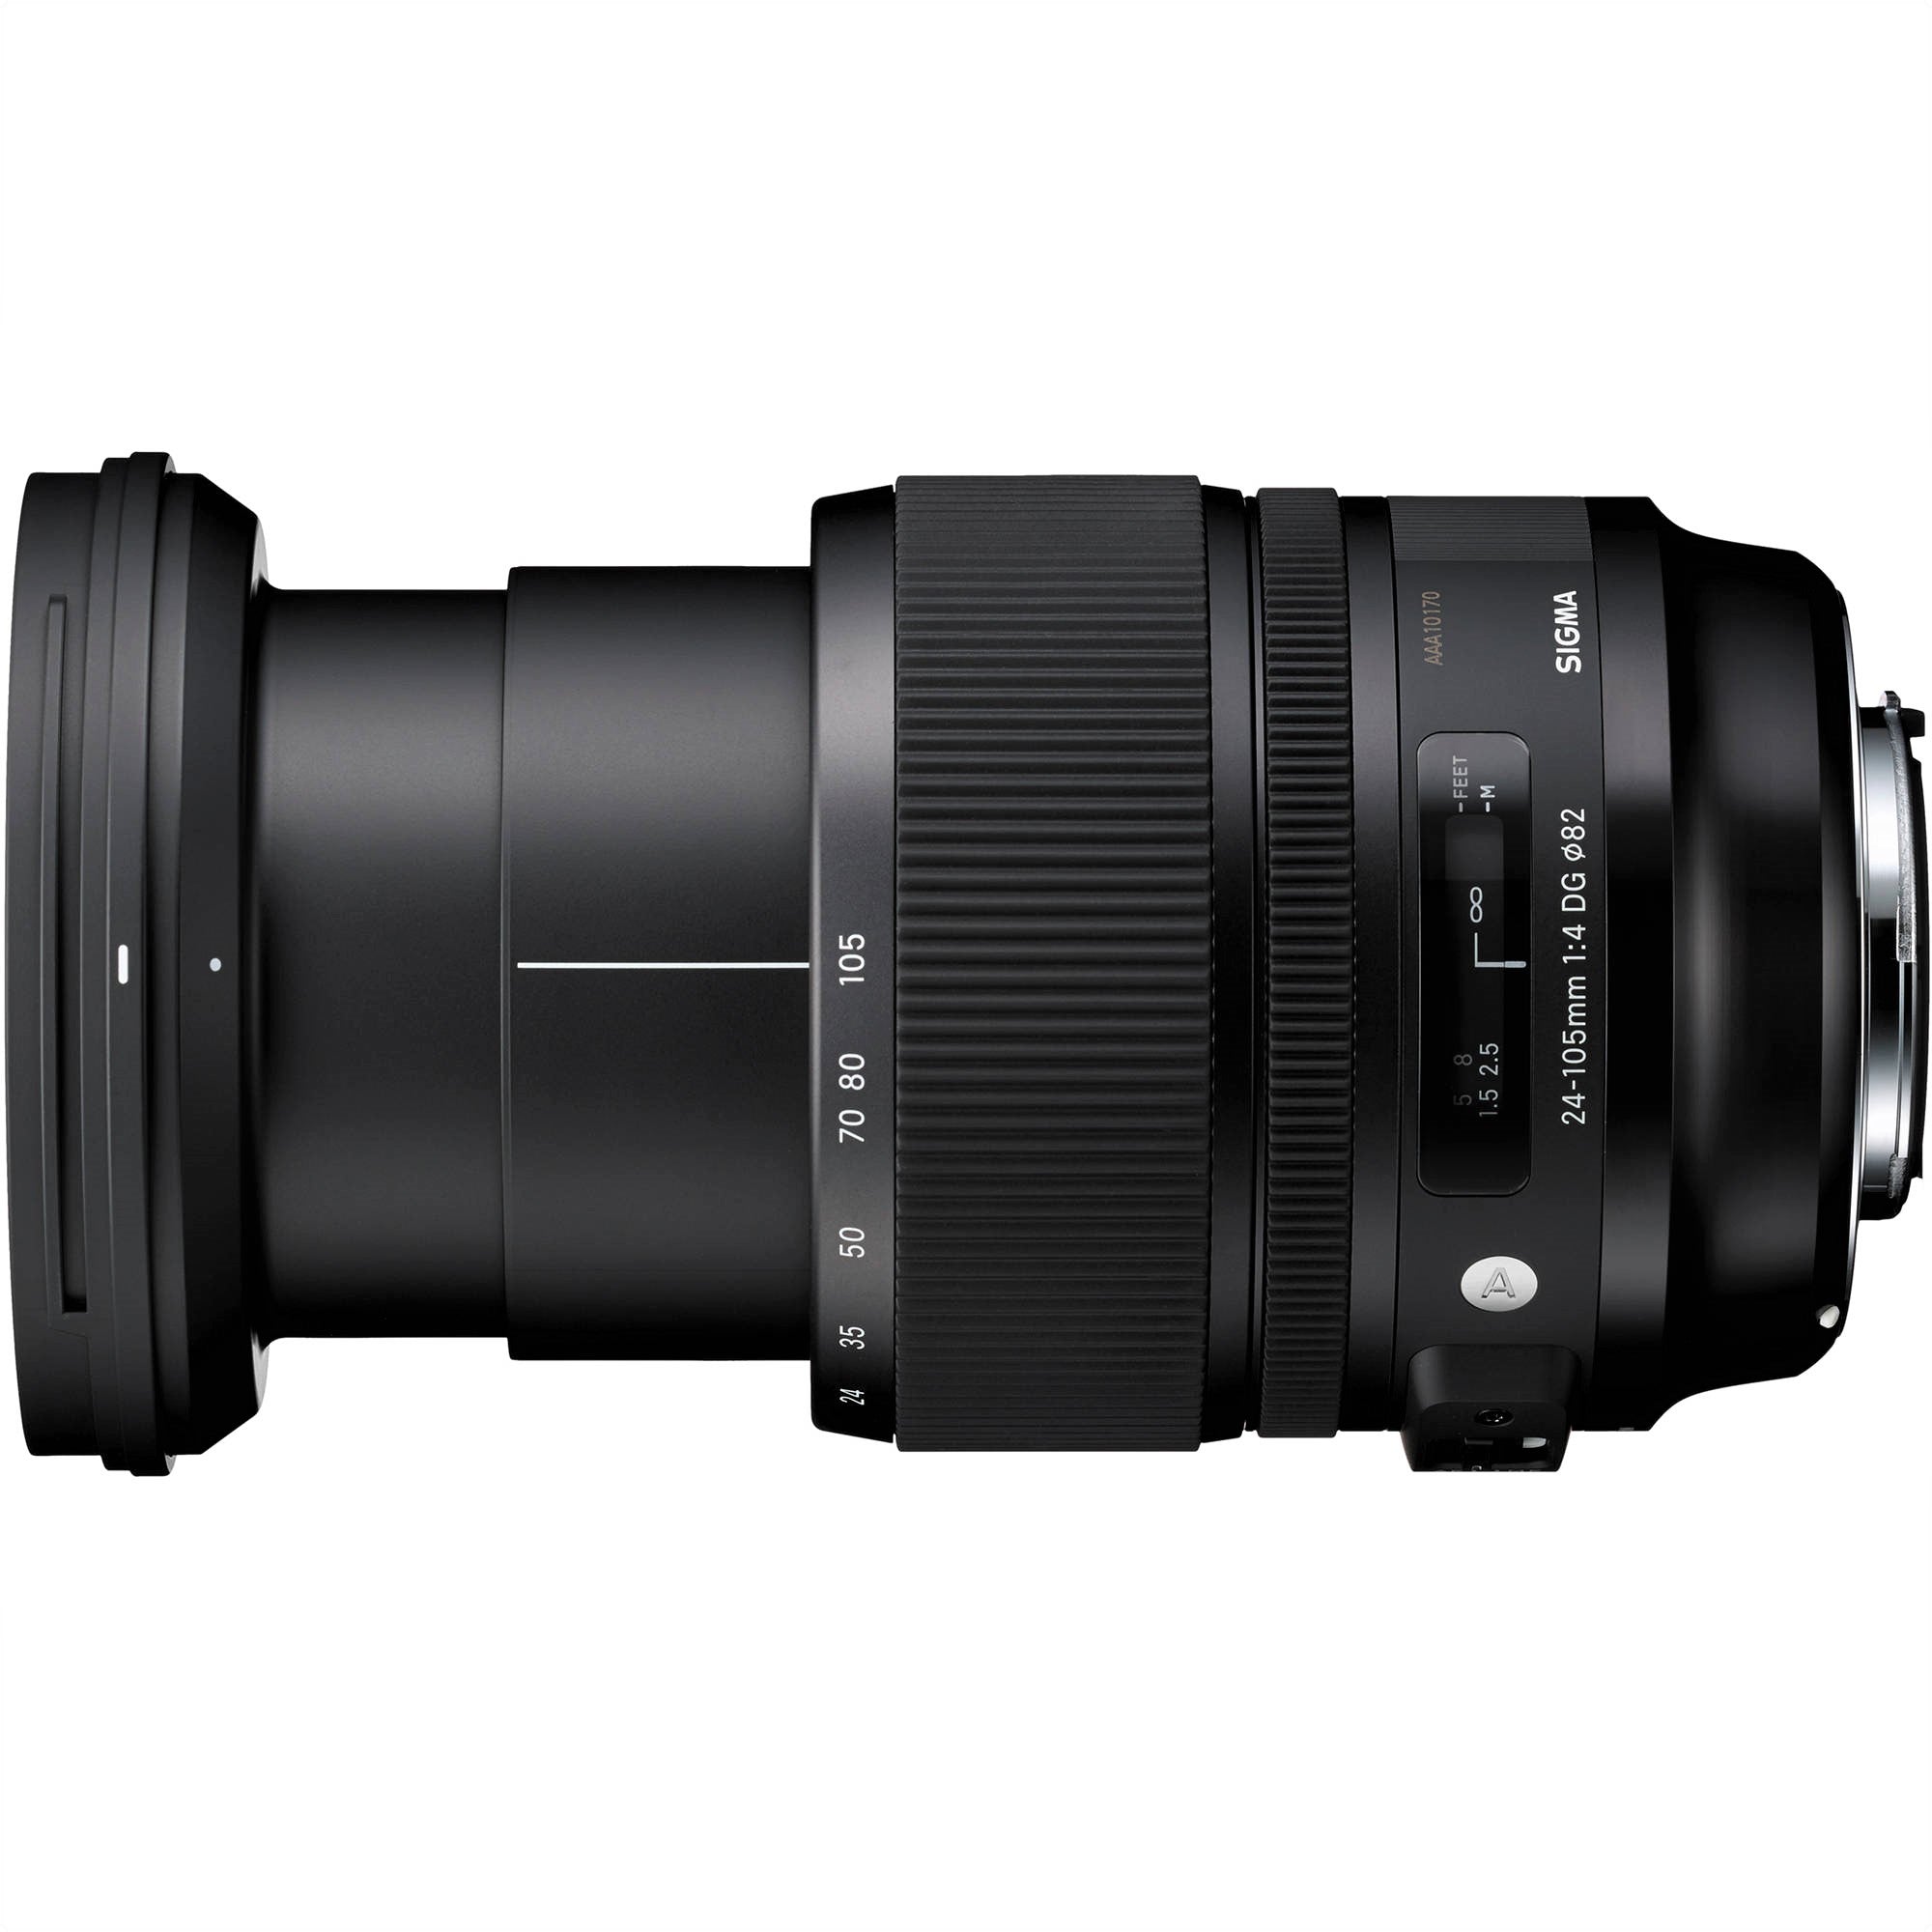 Sigma 24-105mm F4.0 DG OS HSM Art Lens (Sigma SA) with Extended Lens